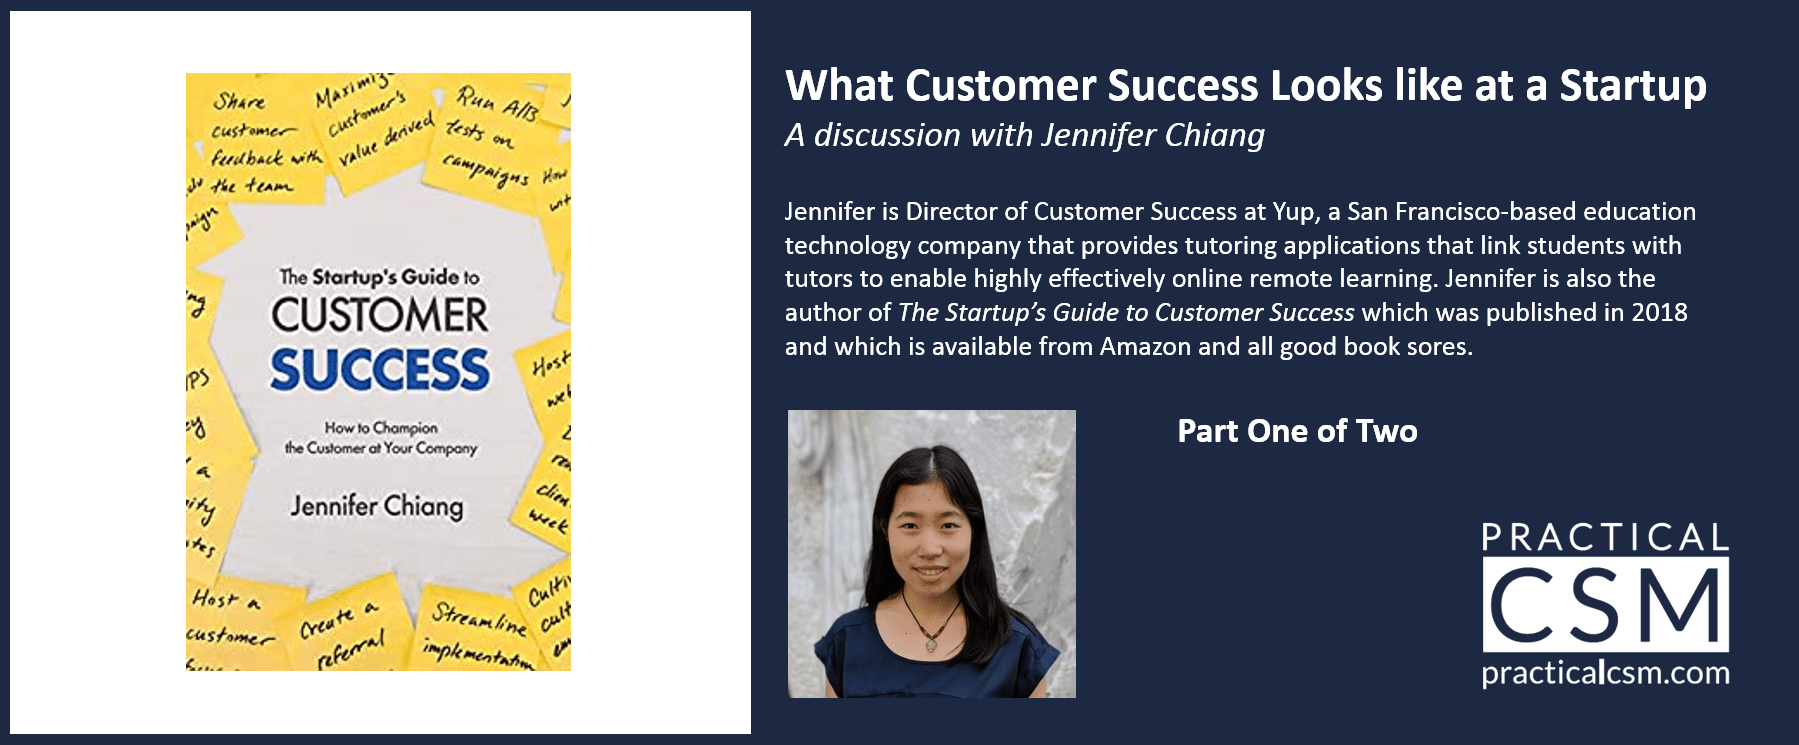 Practical CSM What Customer Success Looks Like at a Startup with Jennifer Chiang part 1